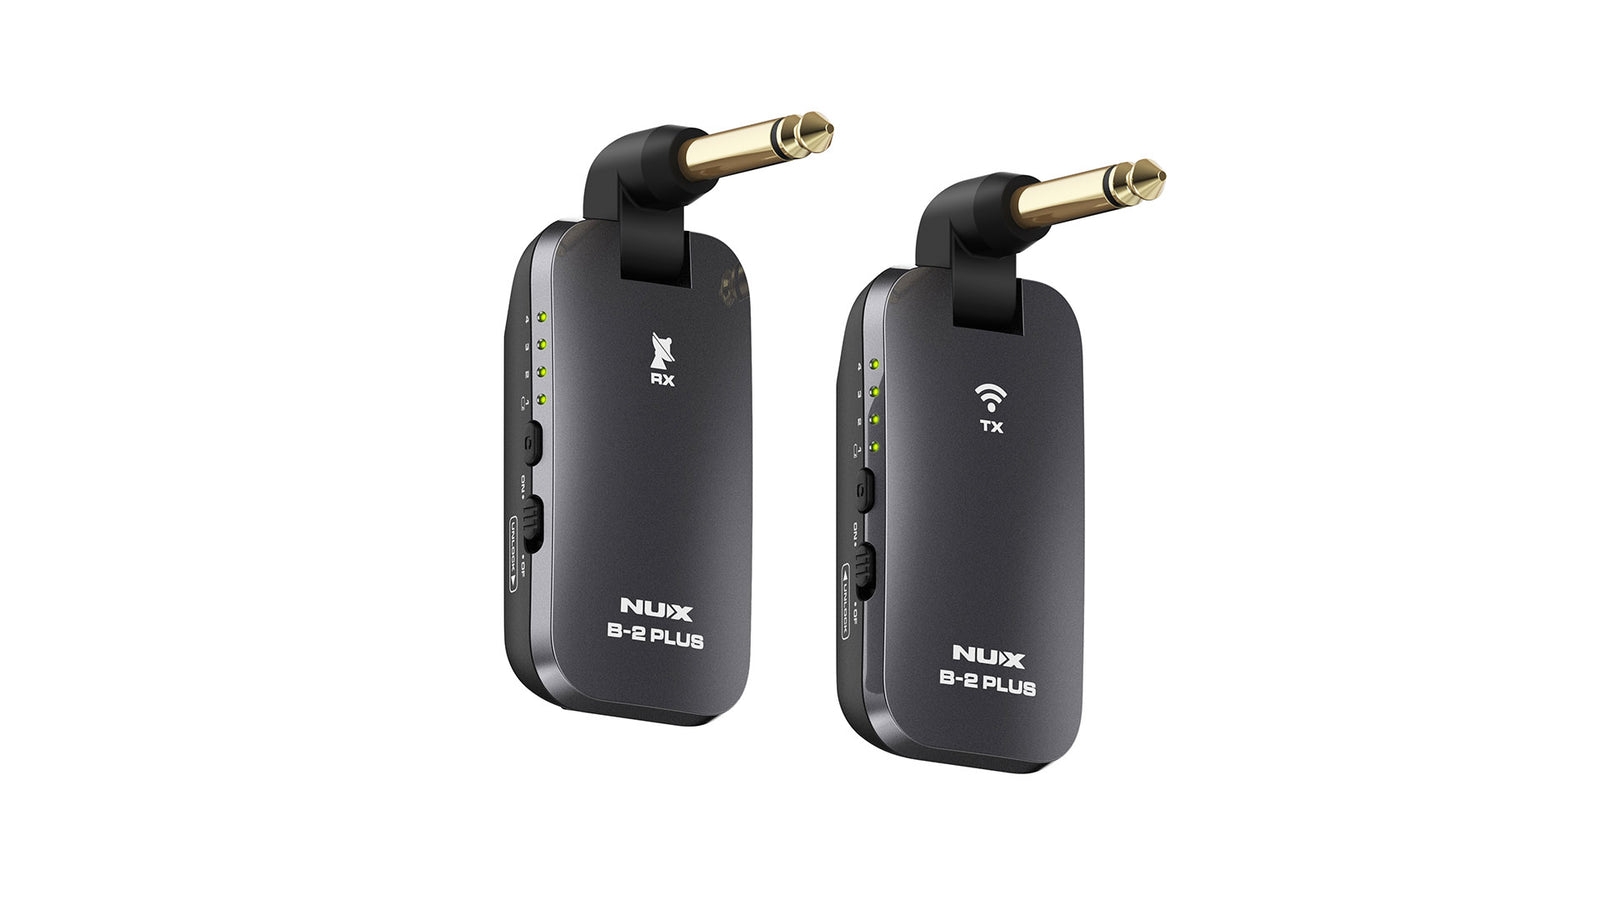 NUX B-2 Plus 2.4Ghz Wireless System for Guitar